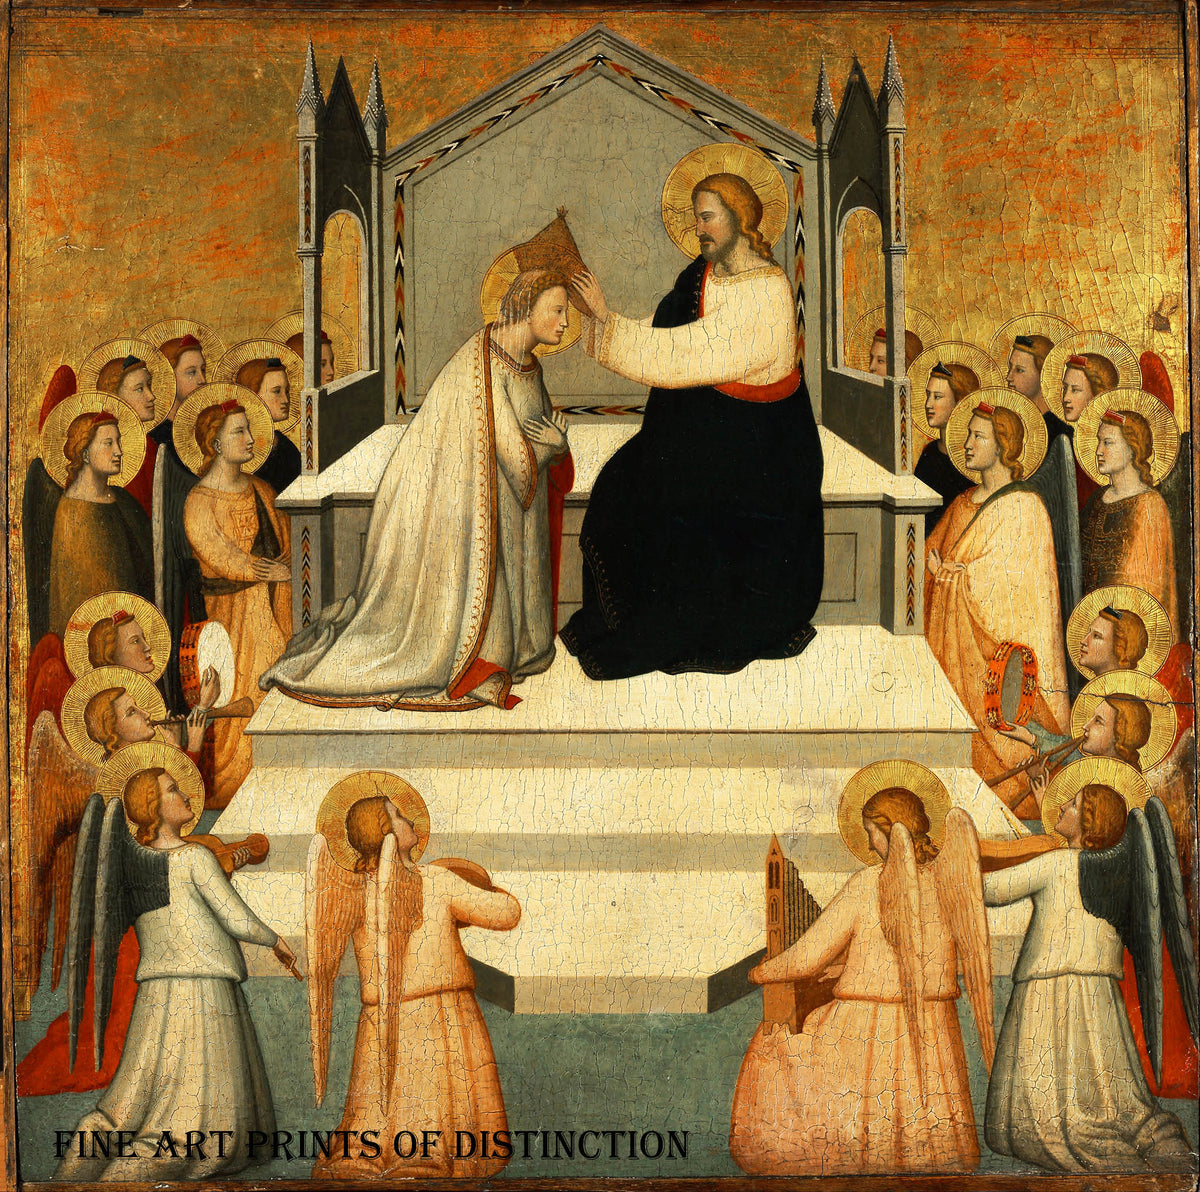 Coronation of the Virgin painted by the early Italian painter Maso di Banco around 1340.